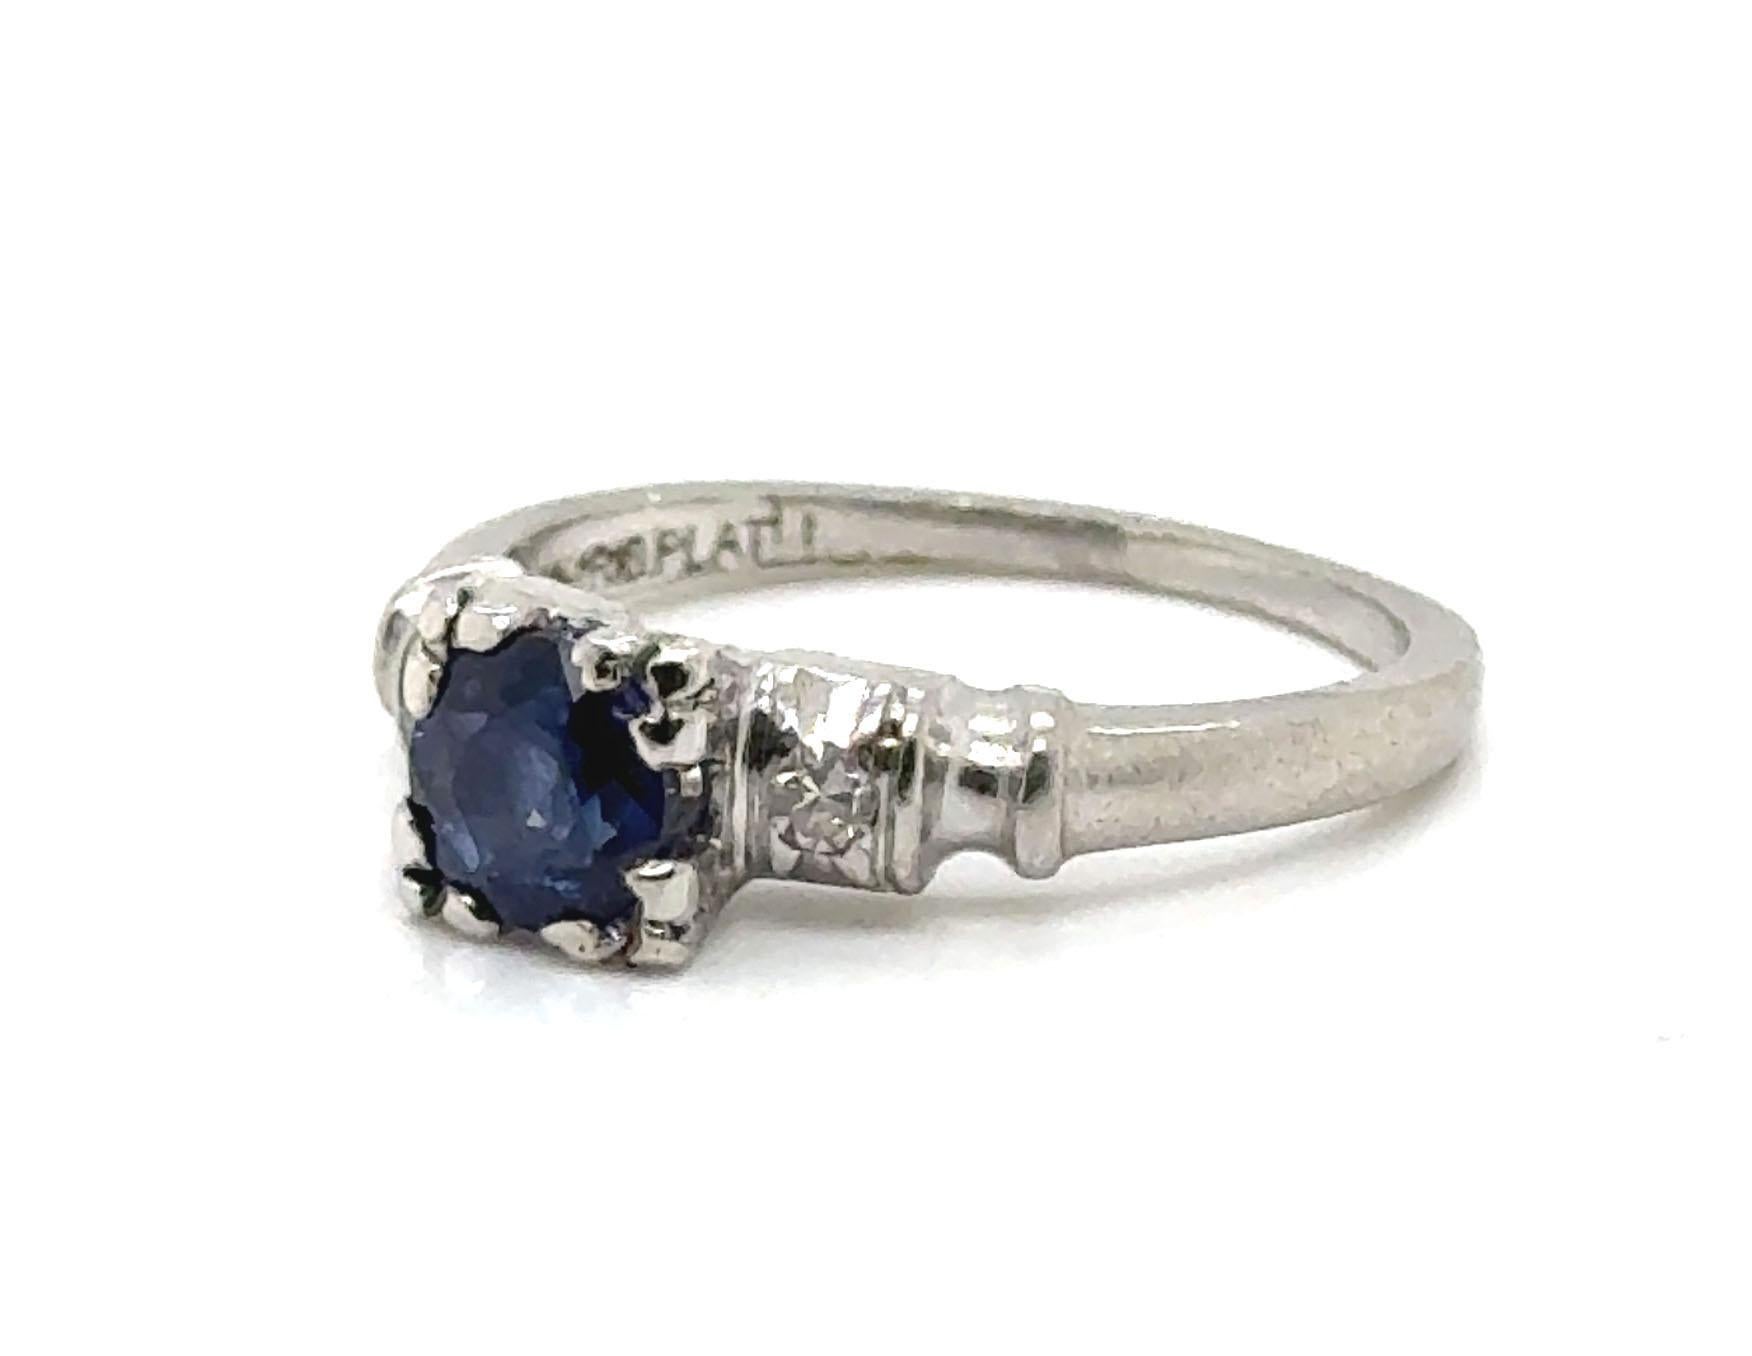 Genuine Original Art Deco Antique from 1930's-1940's Sapphire and Diamond Ring .67ct Vintage Platinum


Features a Genuine .63ct Natural Blue Round Sapphire at its Center

With its Unique Charm, this Ring Serves as a Perfect Alternative for an